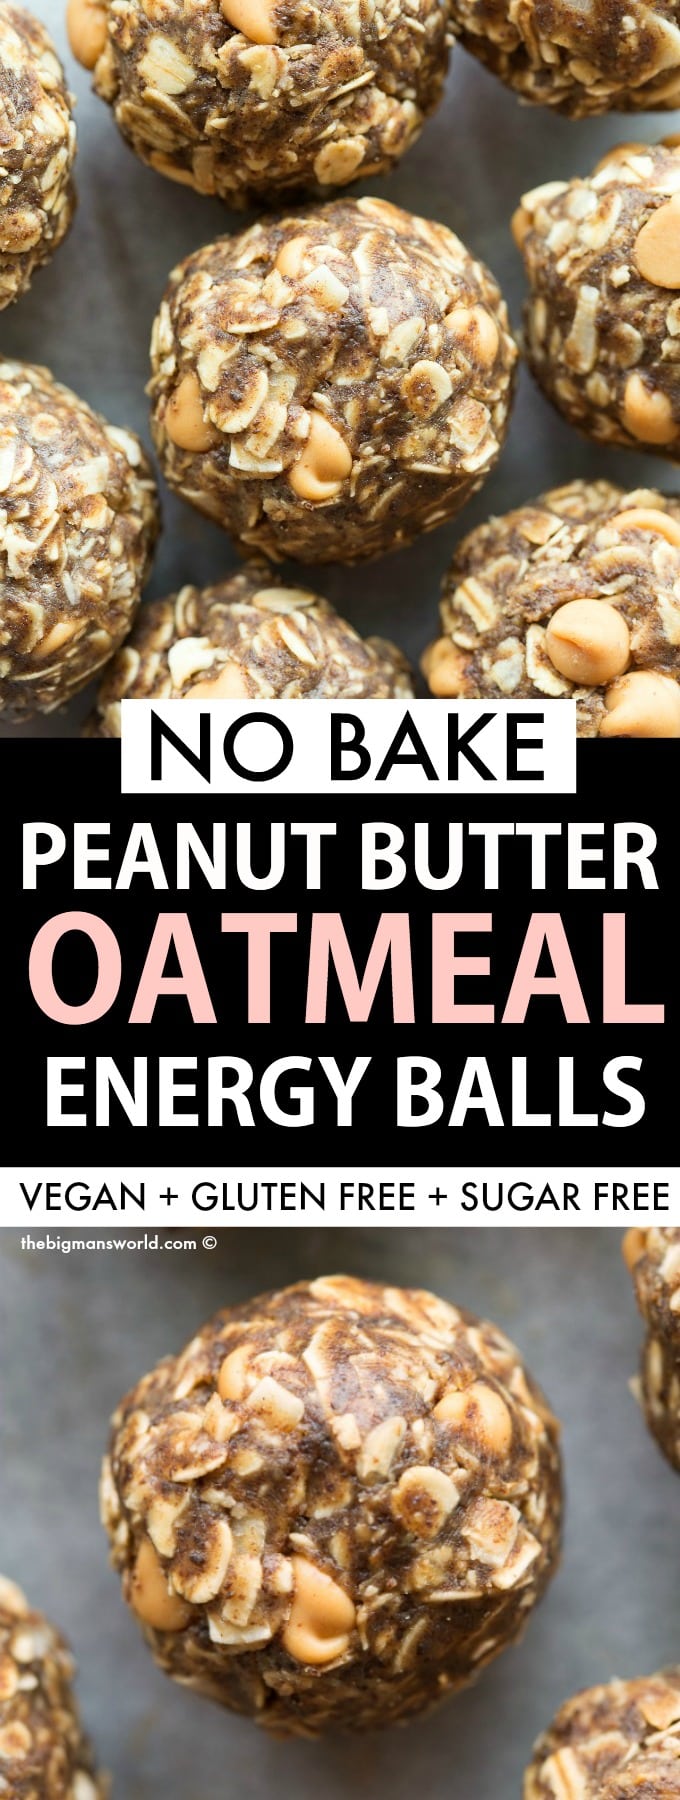 Healthy No Bake Energy Balls recipe with peanut butter, maple syrup and oatmeal!